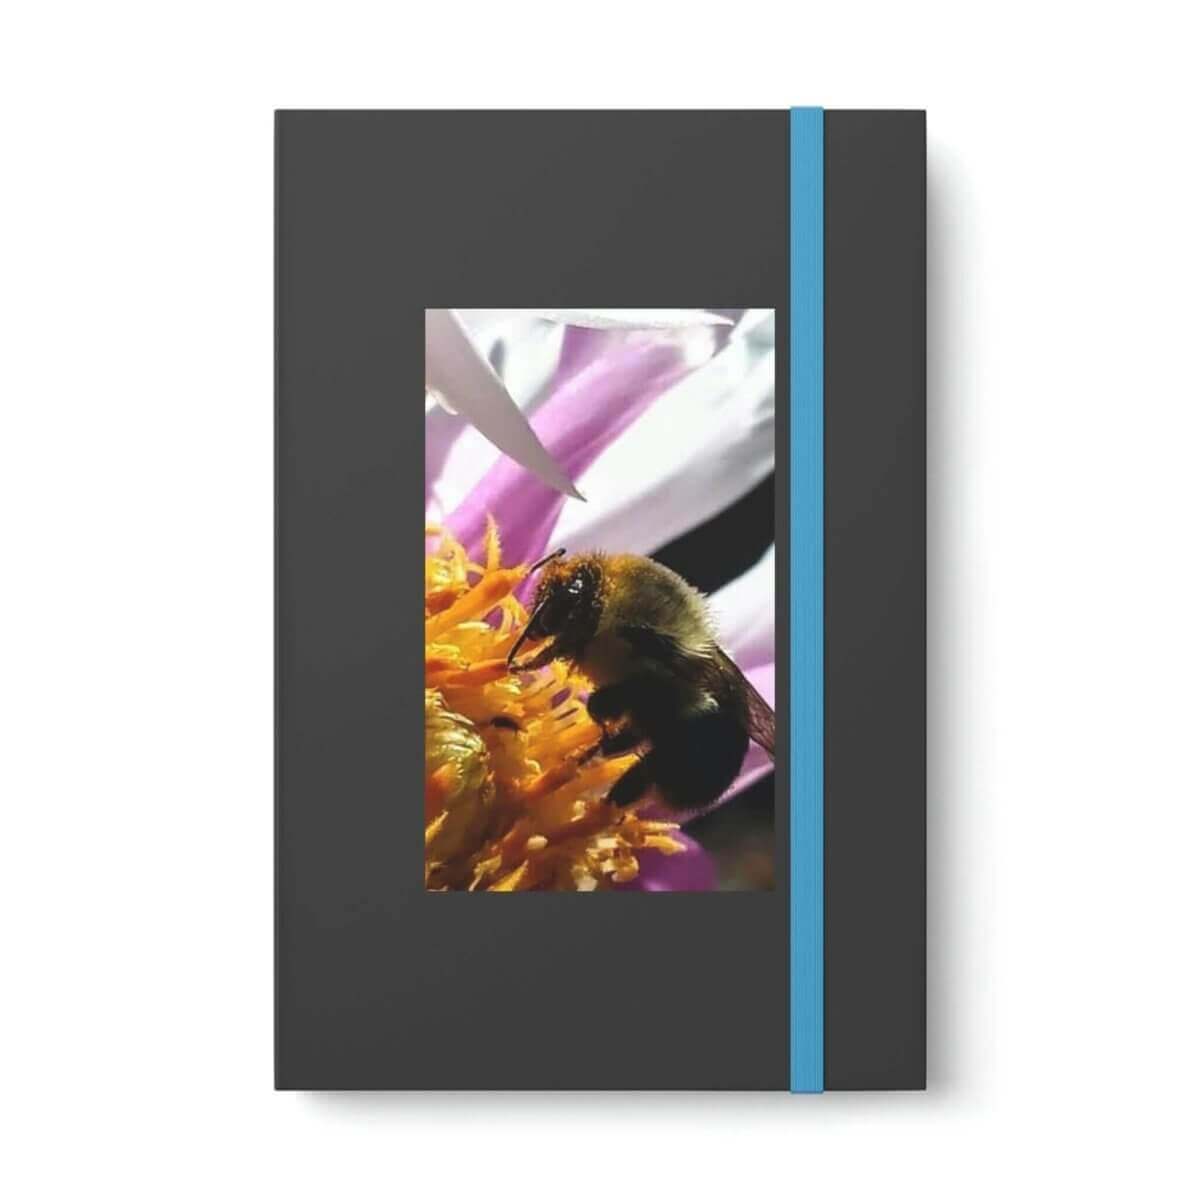 Bumble Bee Contrast Notebook - Ruled - 1